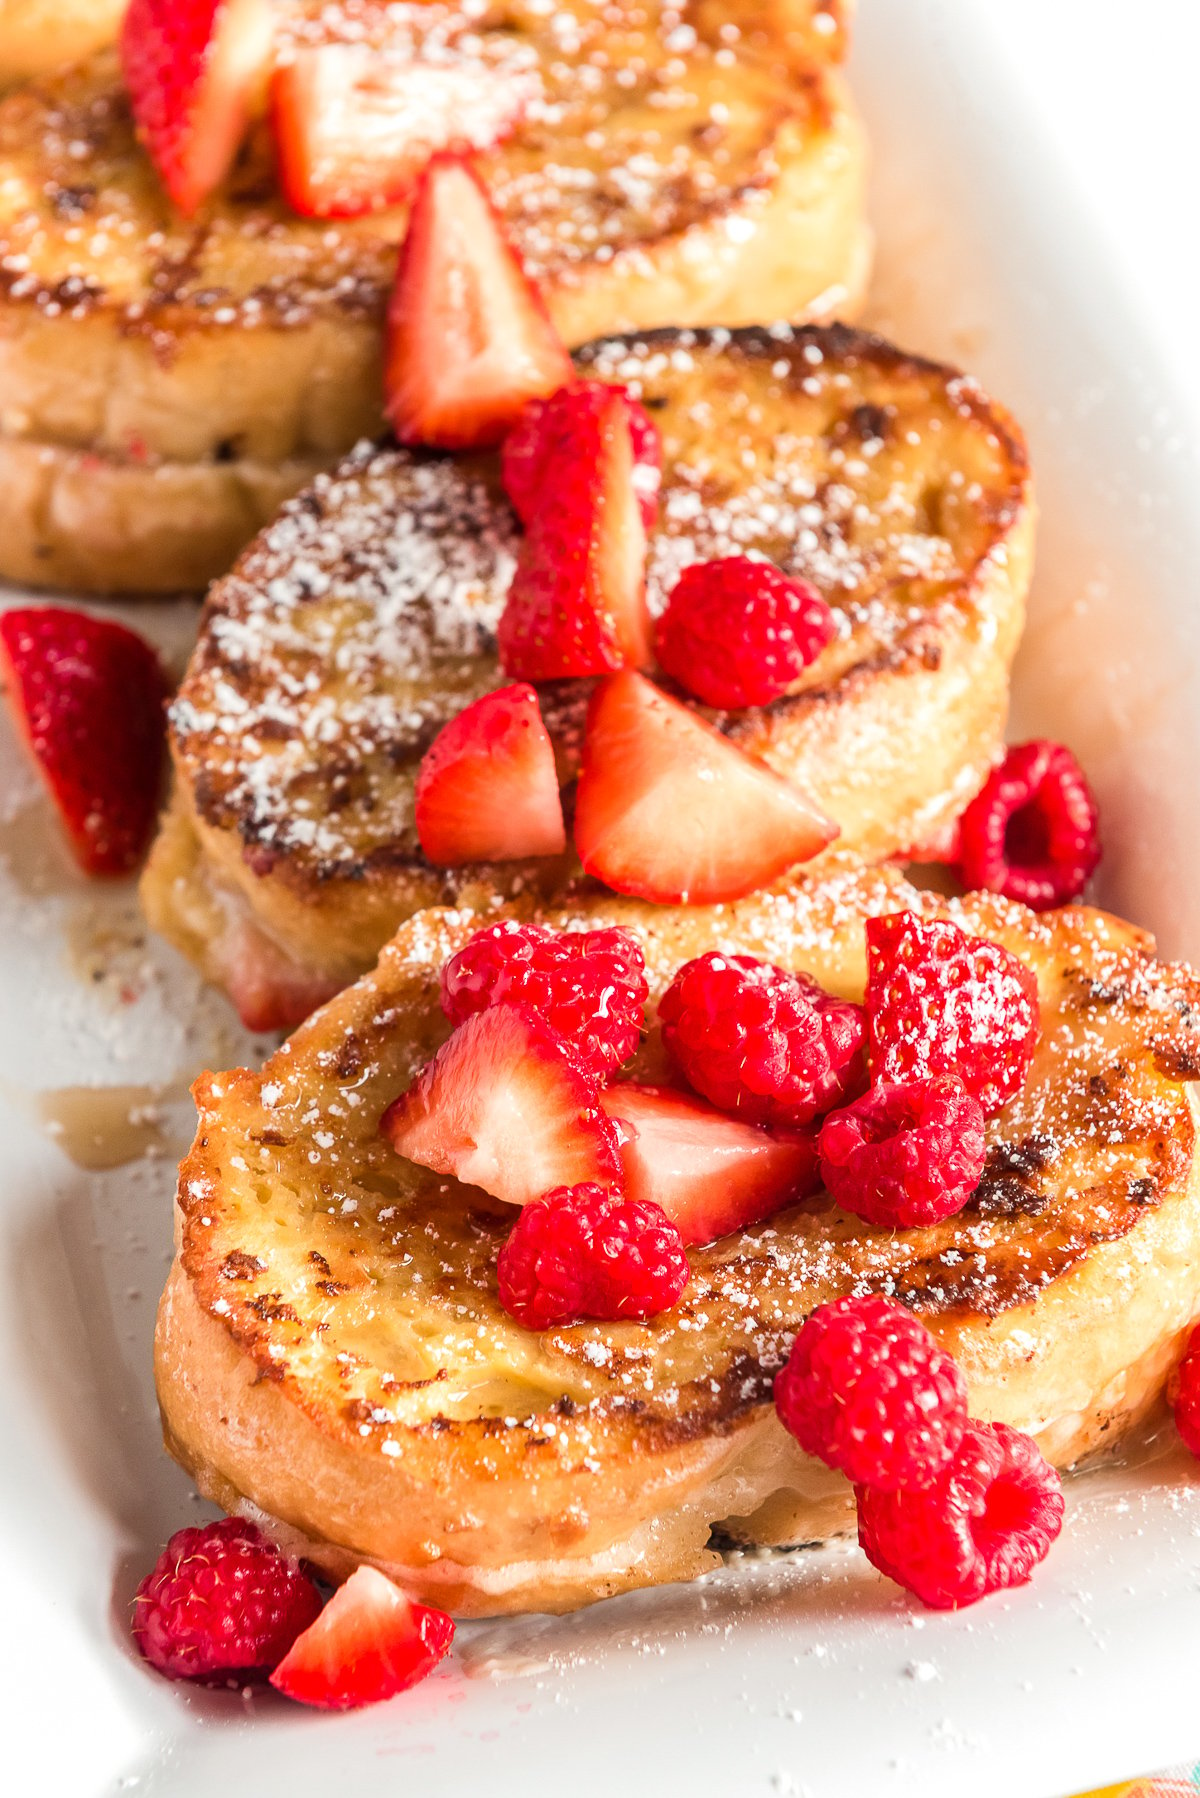 Slices of french toast on a white plate topped with raspberries and strawberries.